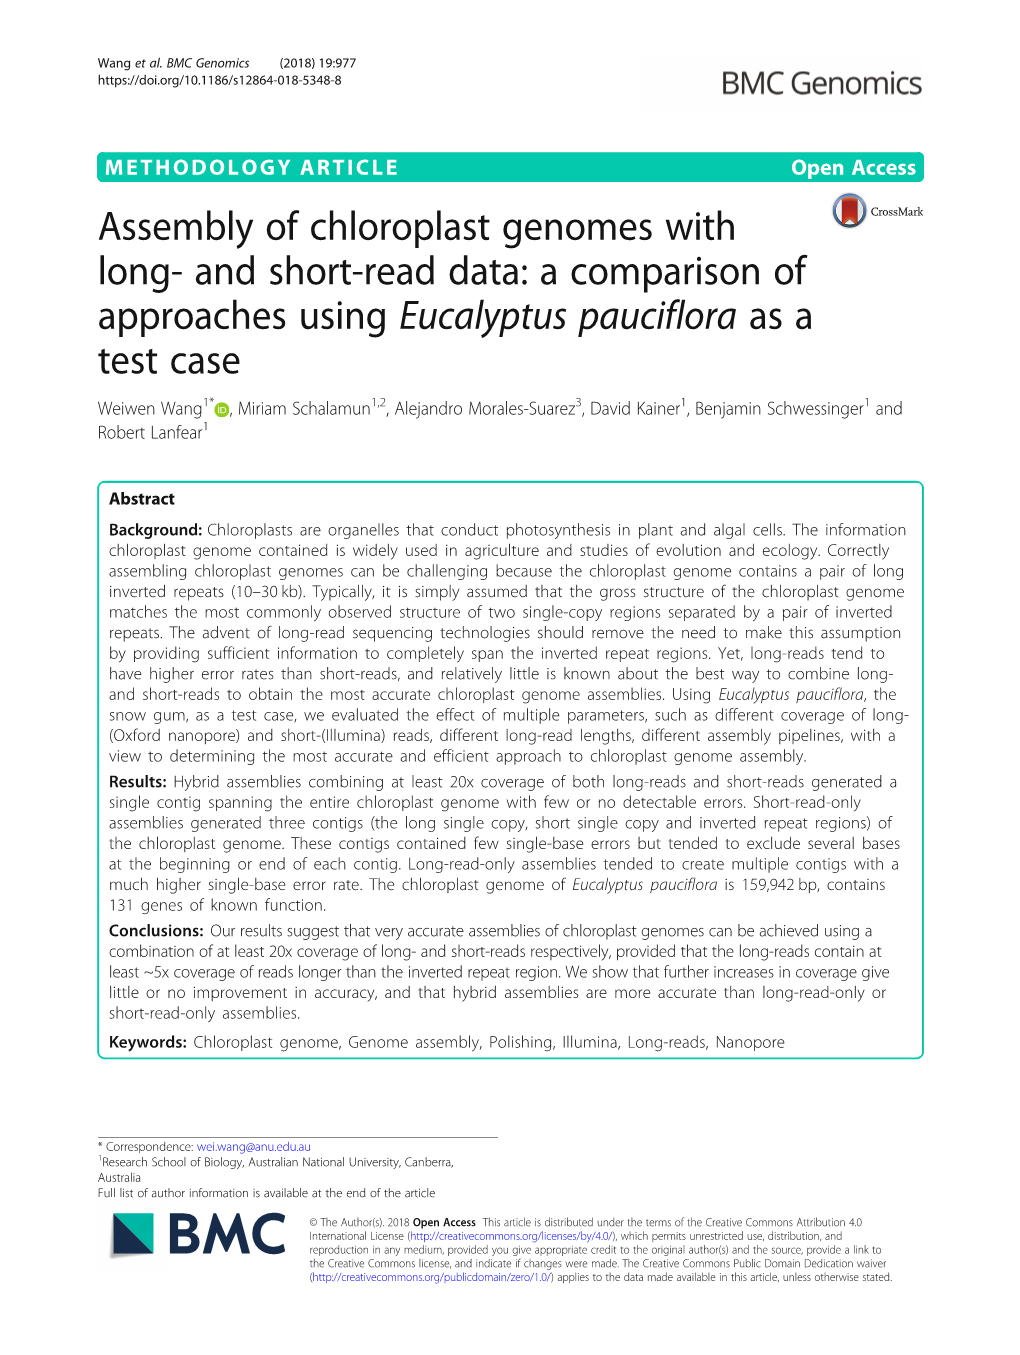 Assembly of Chloroplast Genomes with Long- and Short-Read Data